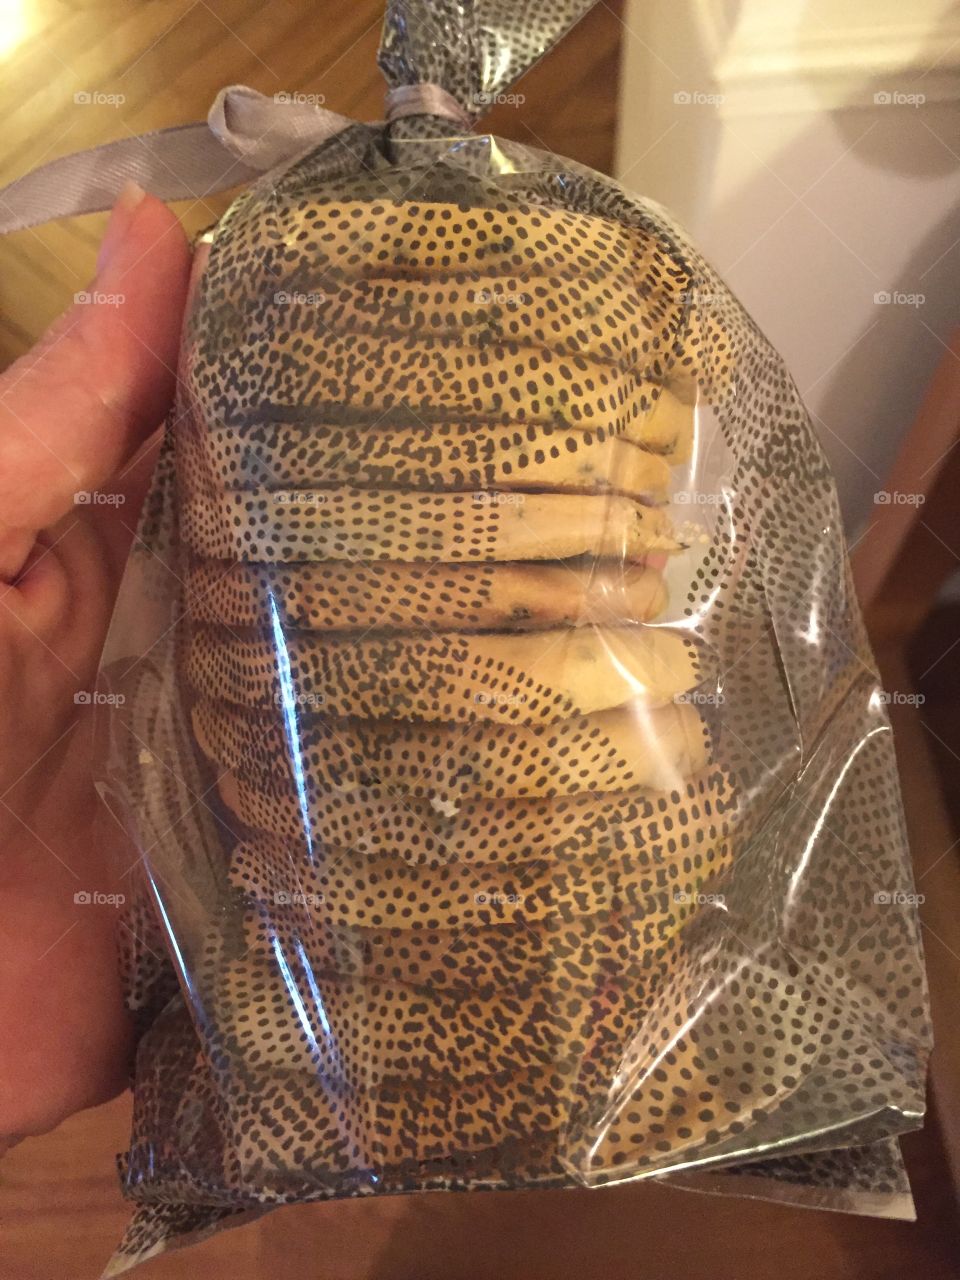 Home baked cookies in a gift bag